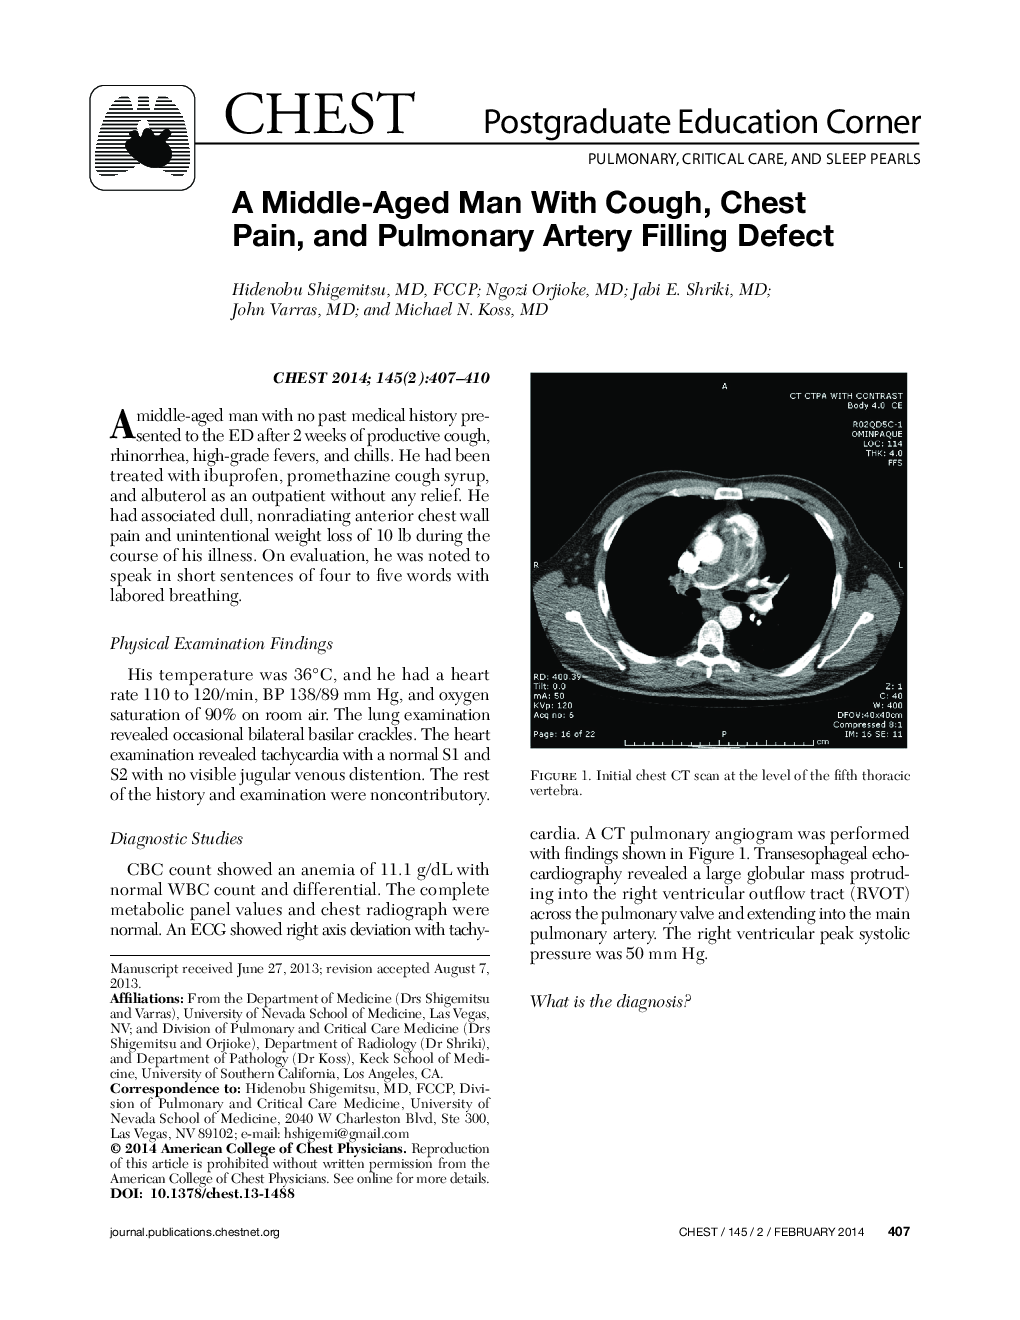 A Middle-Aged Man With Cough, Chest Pain, and Pulmonary Artery Filling Defect